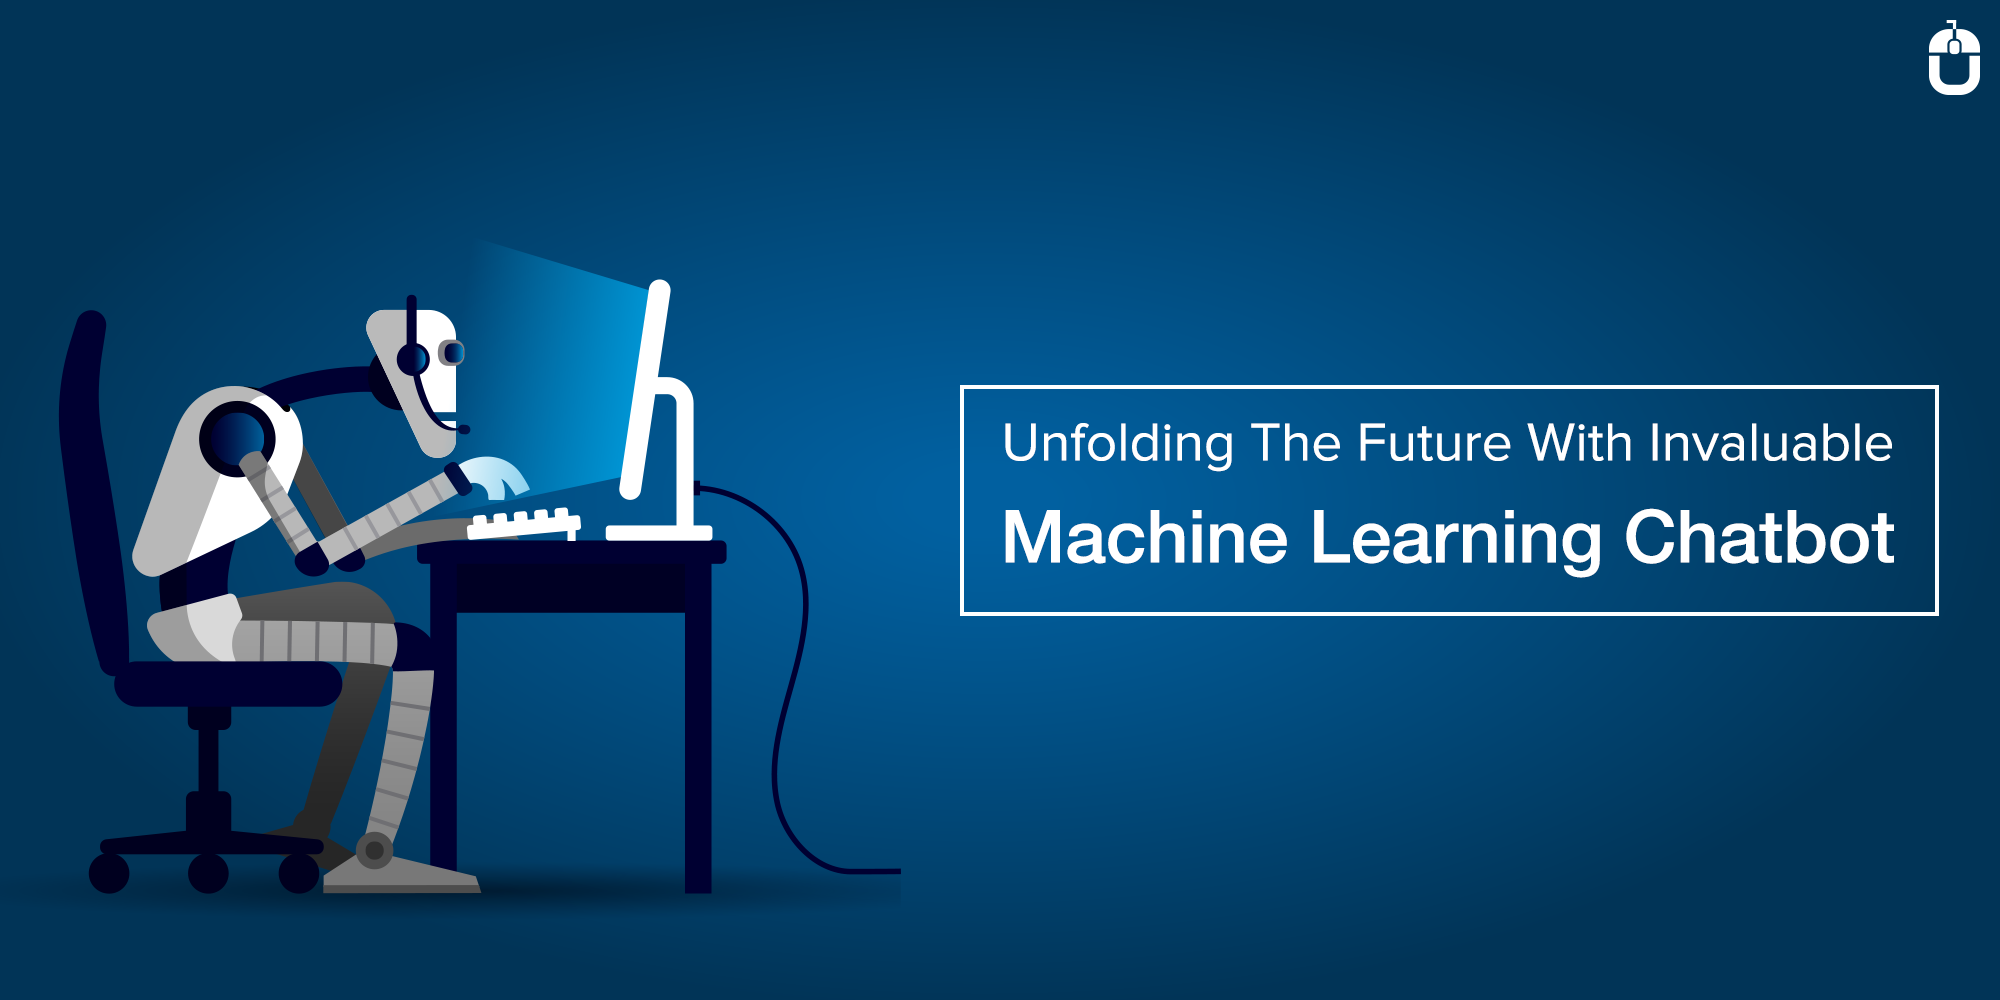 Unfolding The Future With Invaluable Machine Learning Chatbot